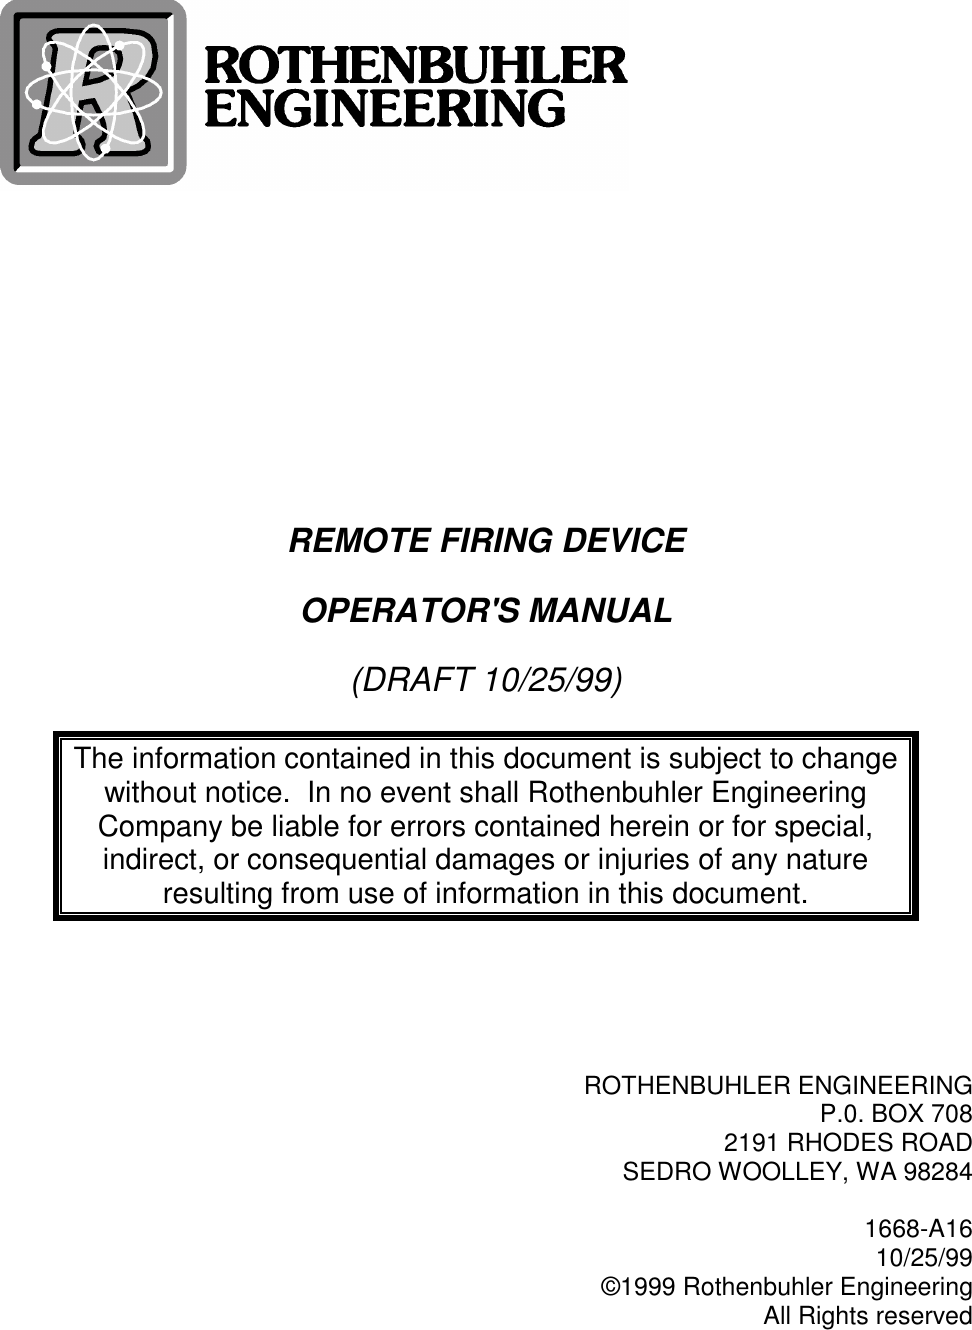 REMOTE FIRING DEVICEOPERATOR&apos;S MANUAL(DRAFT 10/25/99)The information contained in this document is subject to changewithout notice.  In no event shall Rothenbuhler EngineeringCompany be liable for errors contained herein or for special,indirect, or consequential damages or injuries of any natureresulting from use of information in this document.ROTHENBUHLER ENGINEERINGP.0. BOX 7082191 RHODES ROADSEDRO WOOLLEY, WA 982841668-A1610/25/99©1999 Rothenbuhler EngineeringAll Rights reserved